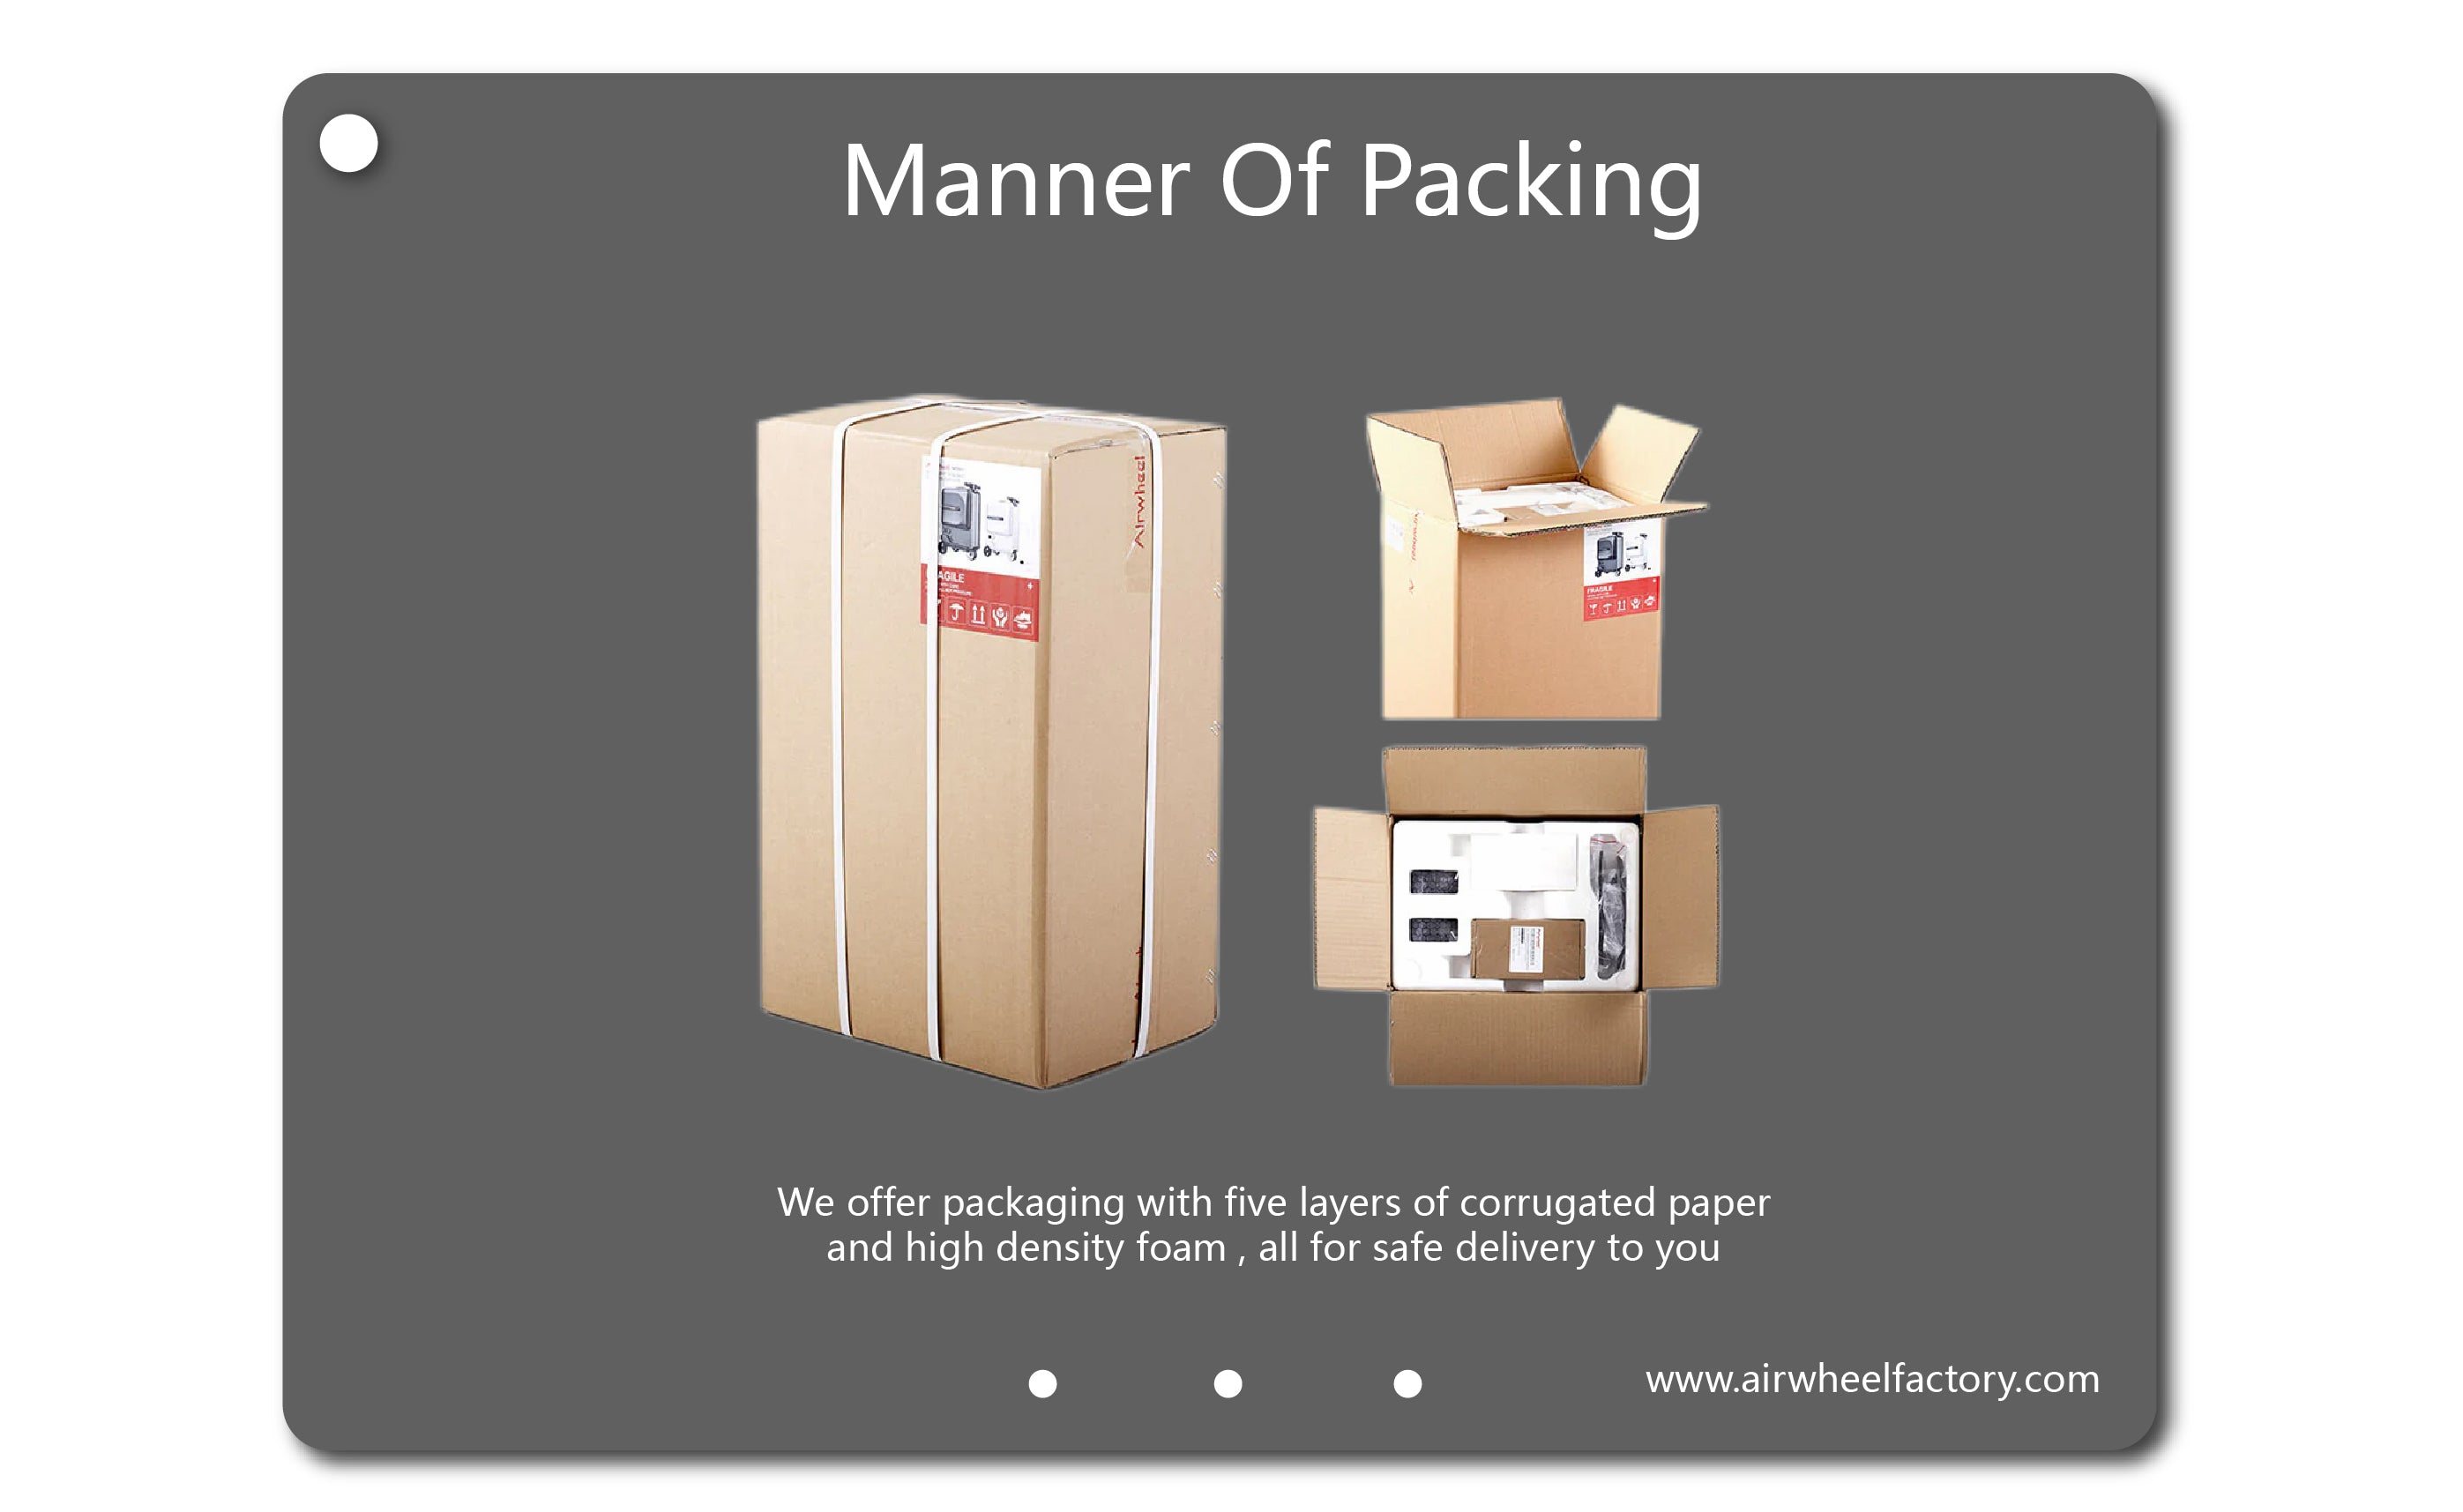 airwheel-factory-manner-of-packing